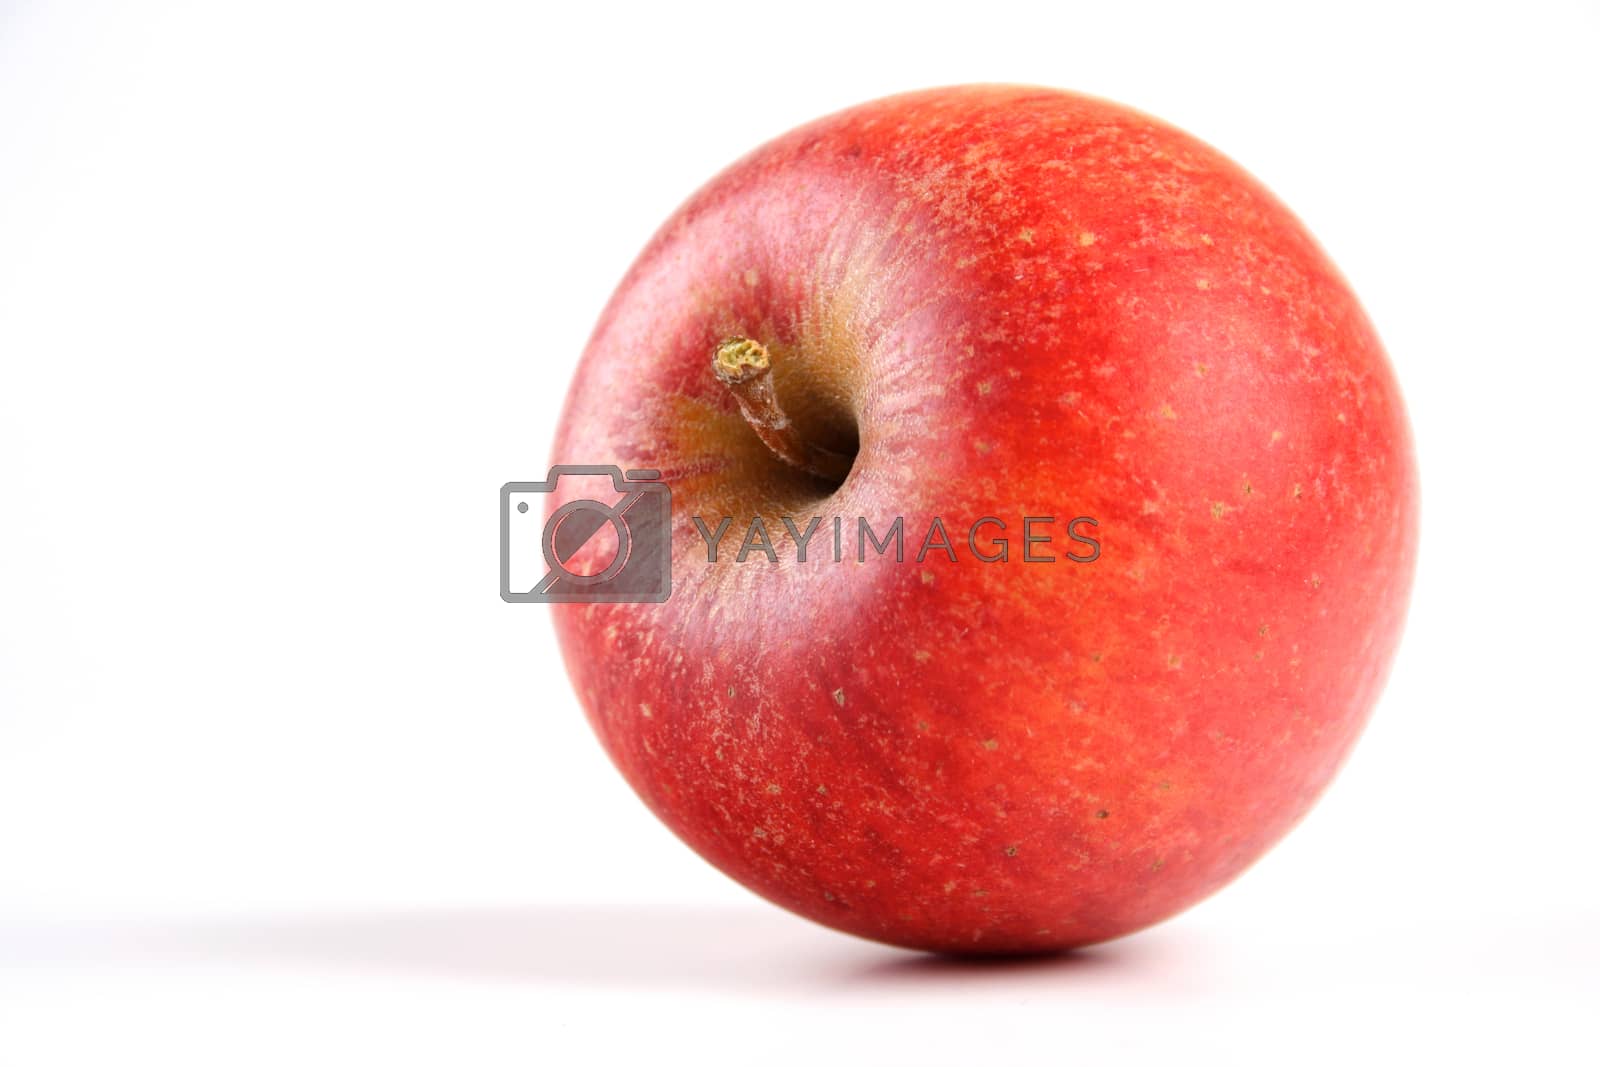 Royalty free image of Apples by moodboard